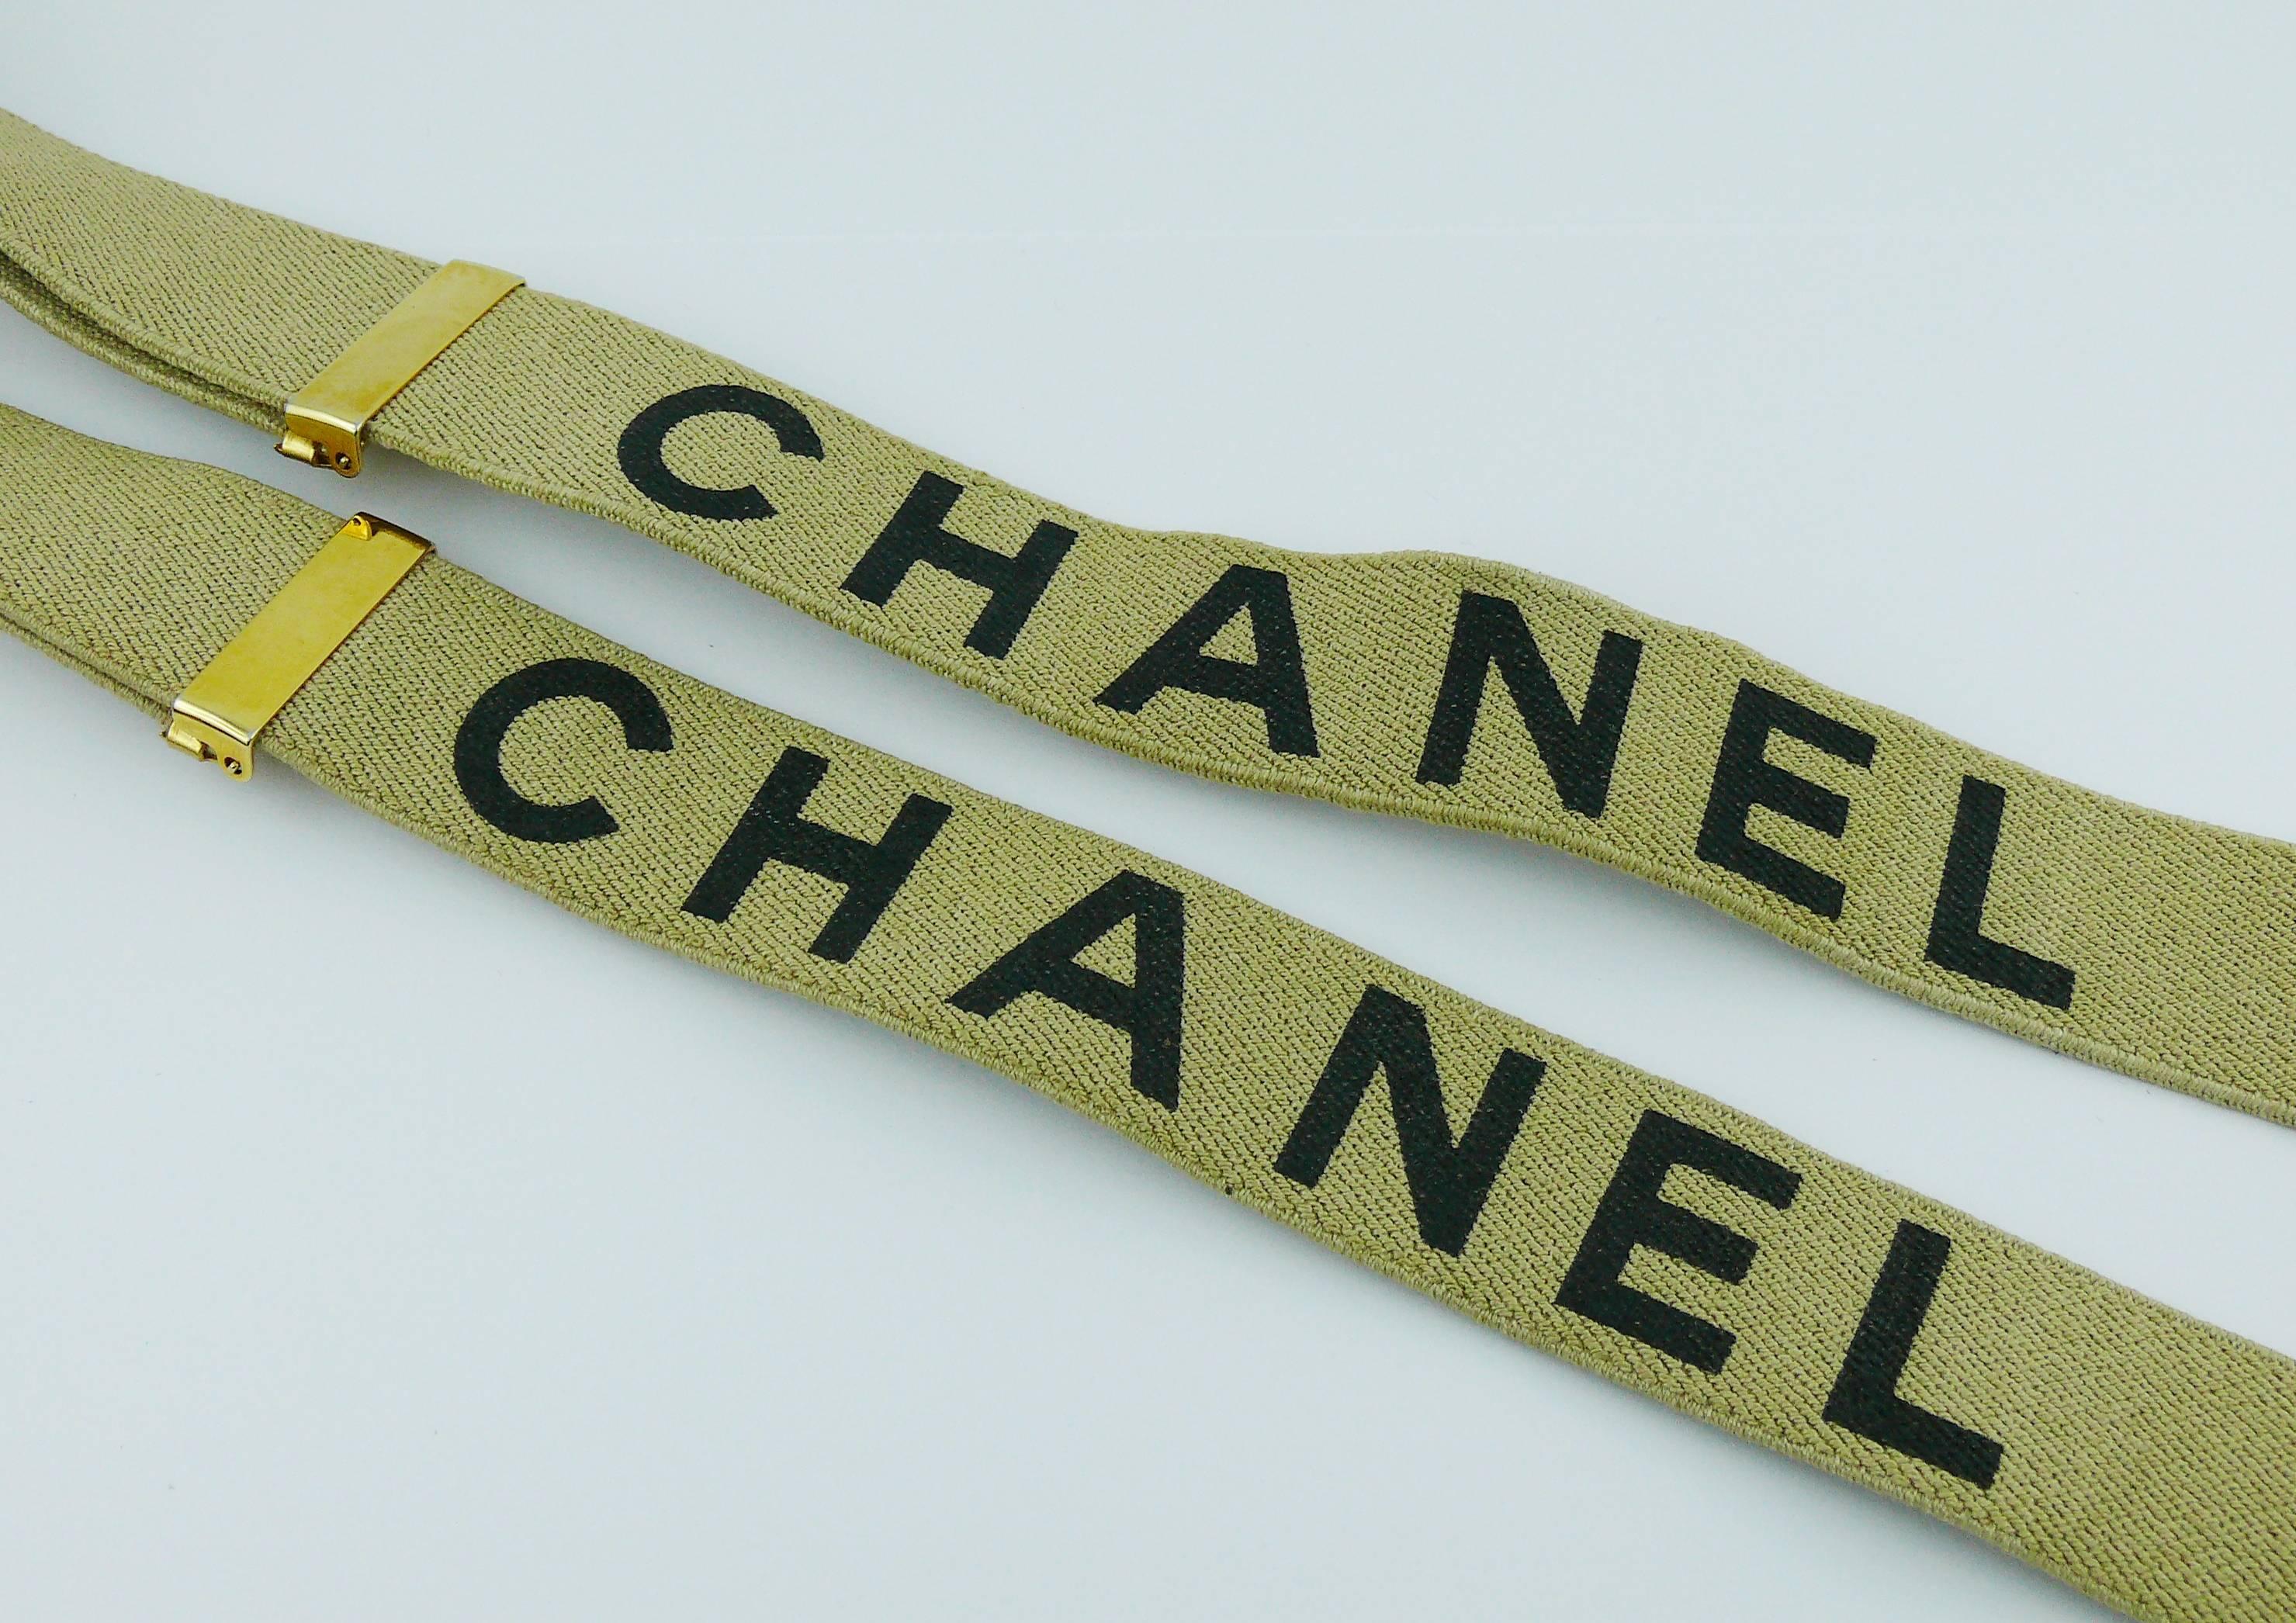 Women's Chanel Vintage Iconic Light Brown and Black Suspenders